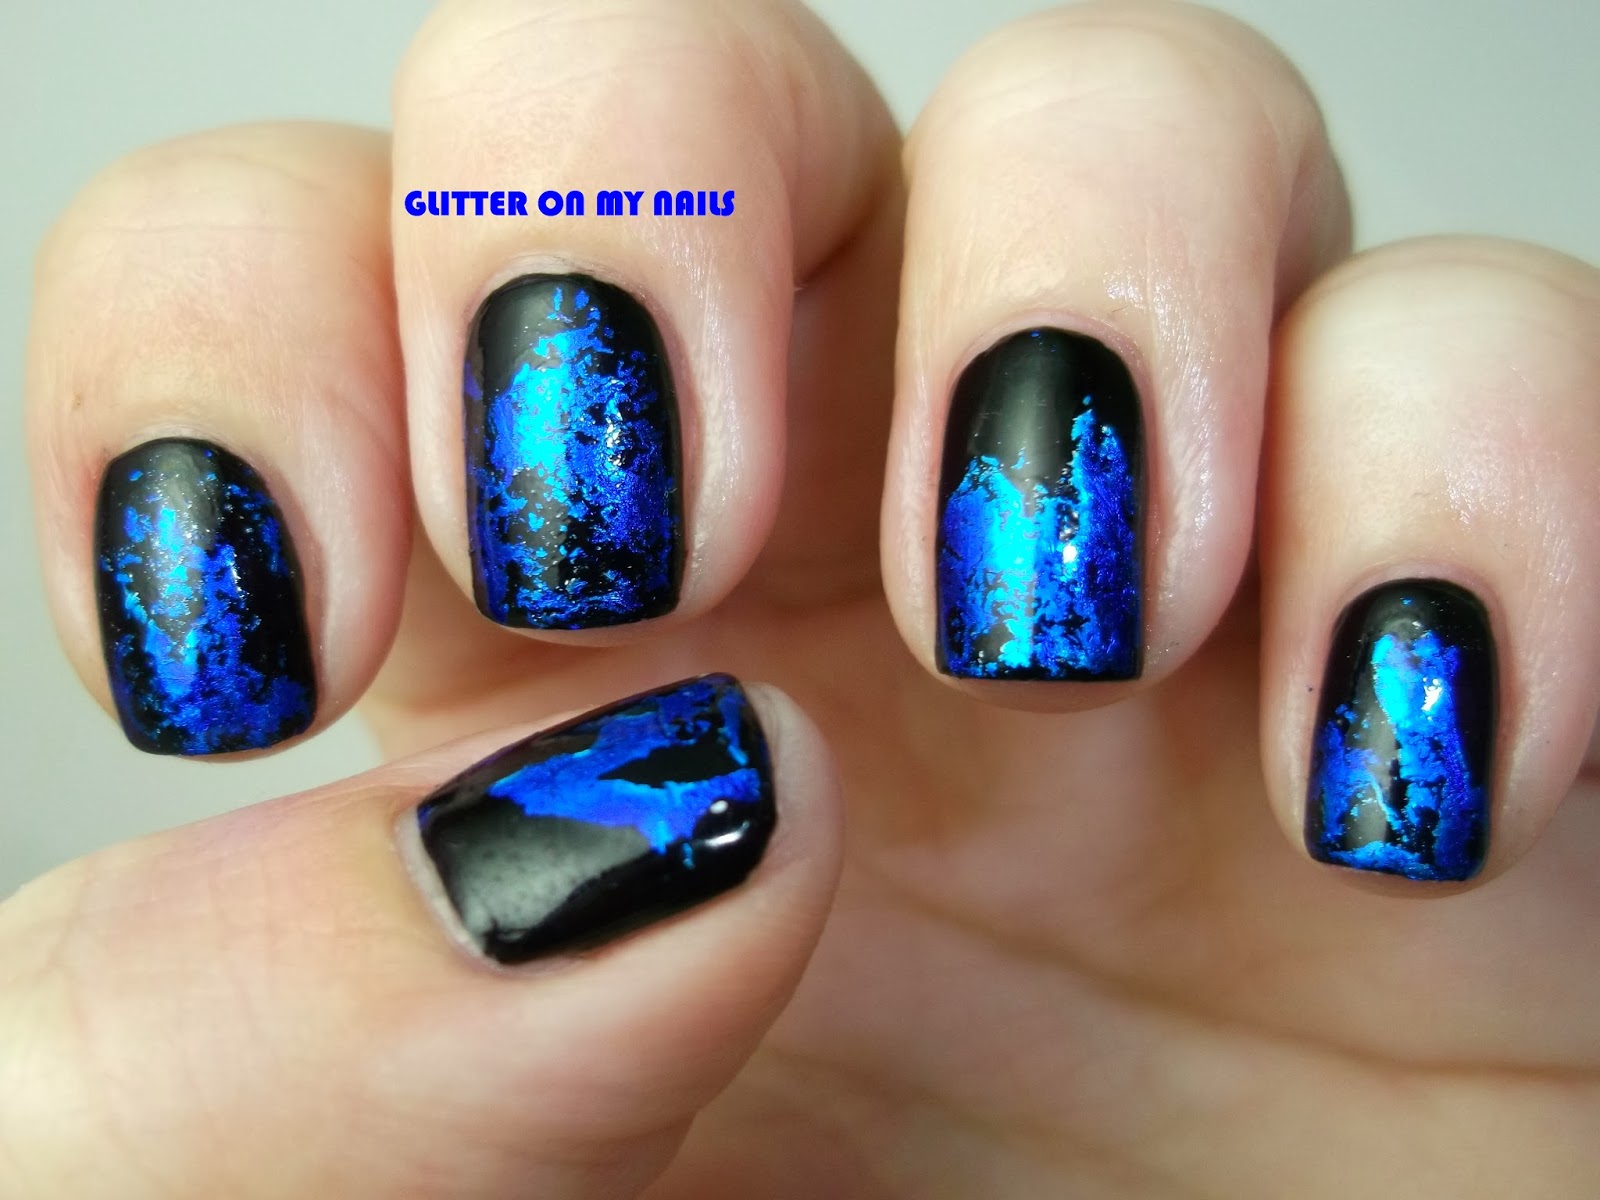 GLITTER ON MY NAILS: BLUE FOIL FOR NEW YEAR'S EVE